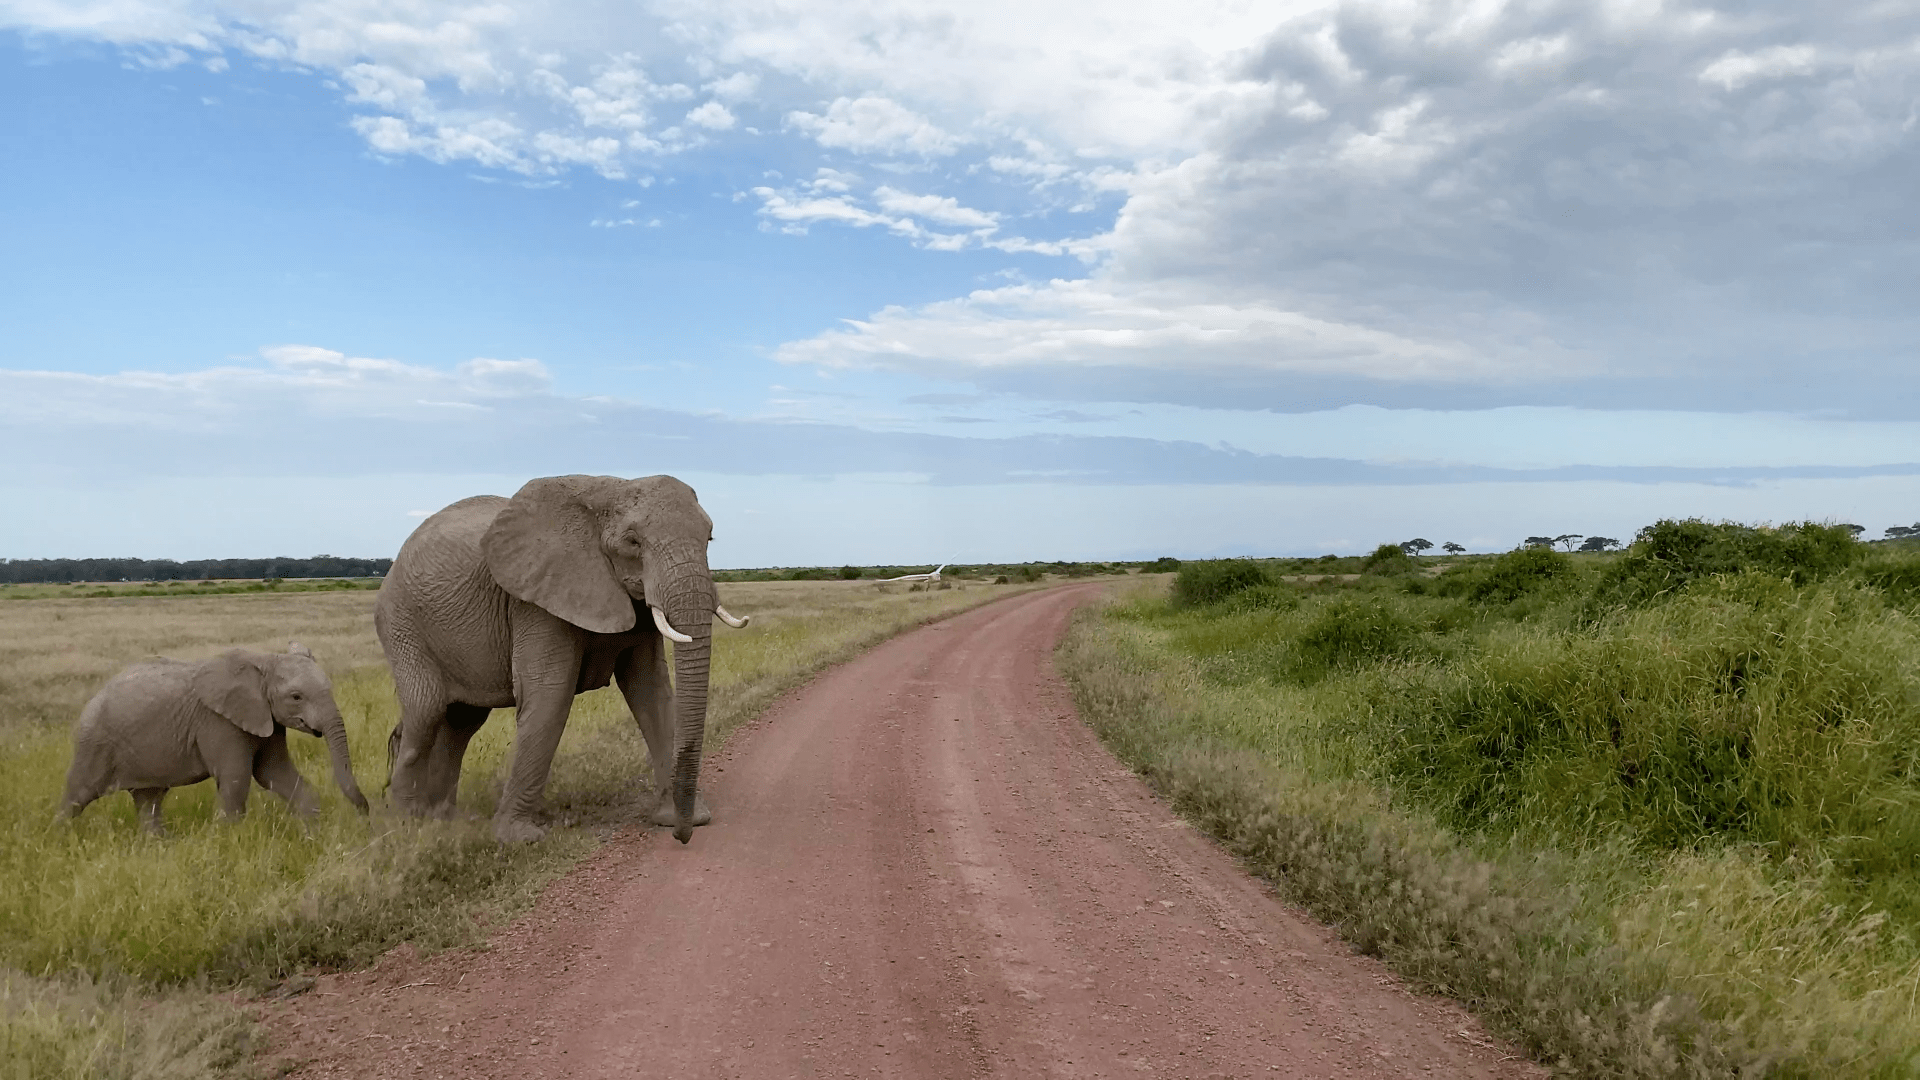 A frame from a video of a group of elephants walk across a dusty road in the Amboseli National Park in Kenya